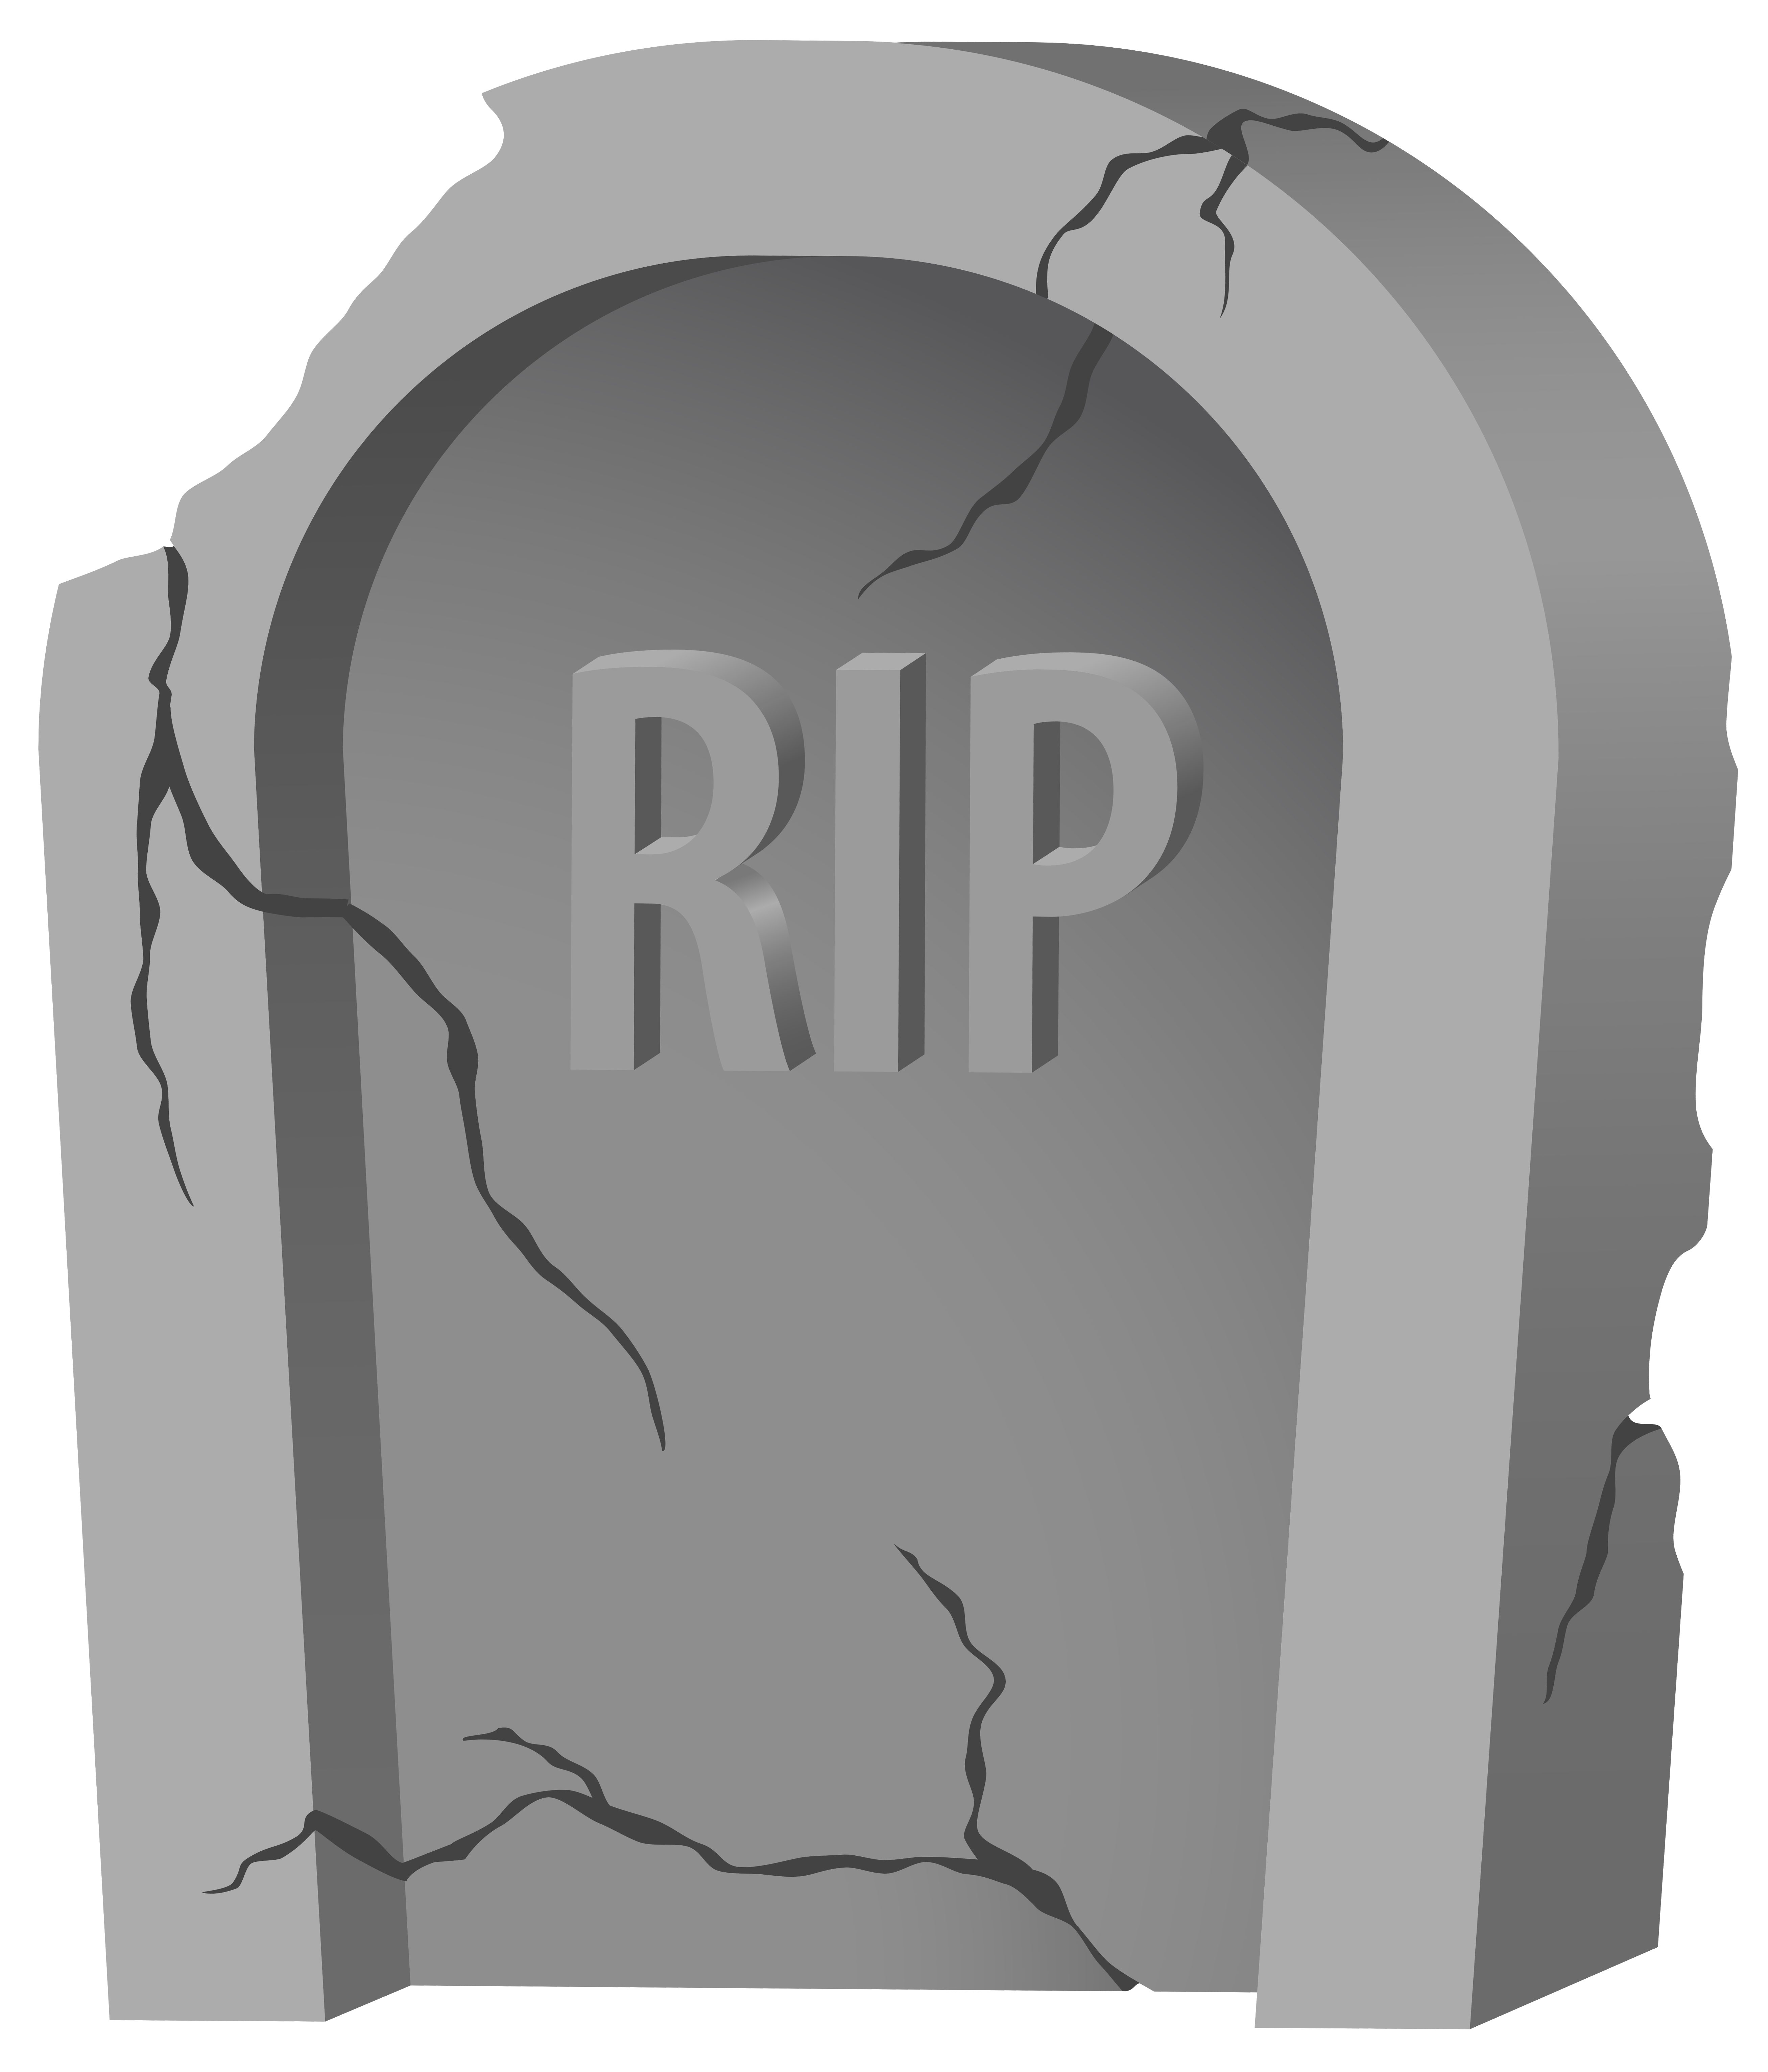 Free Rip Tombstone Png, Download Free Rip Tombstone Png png images